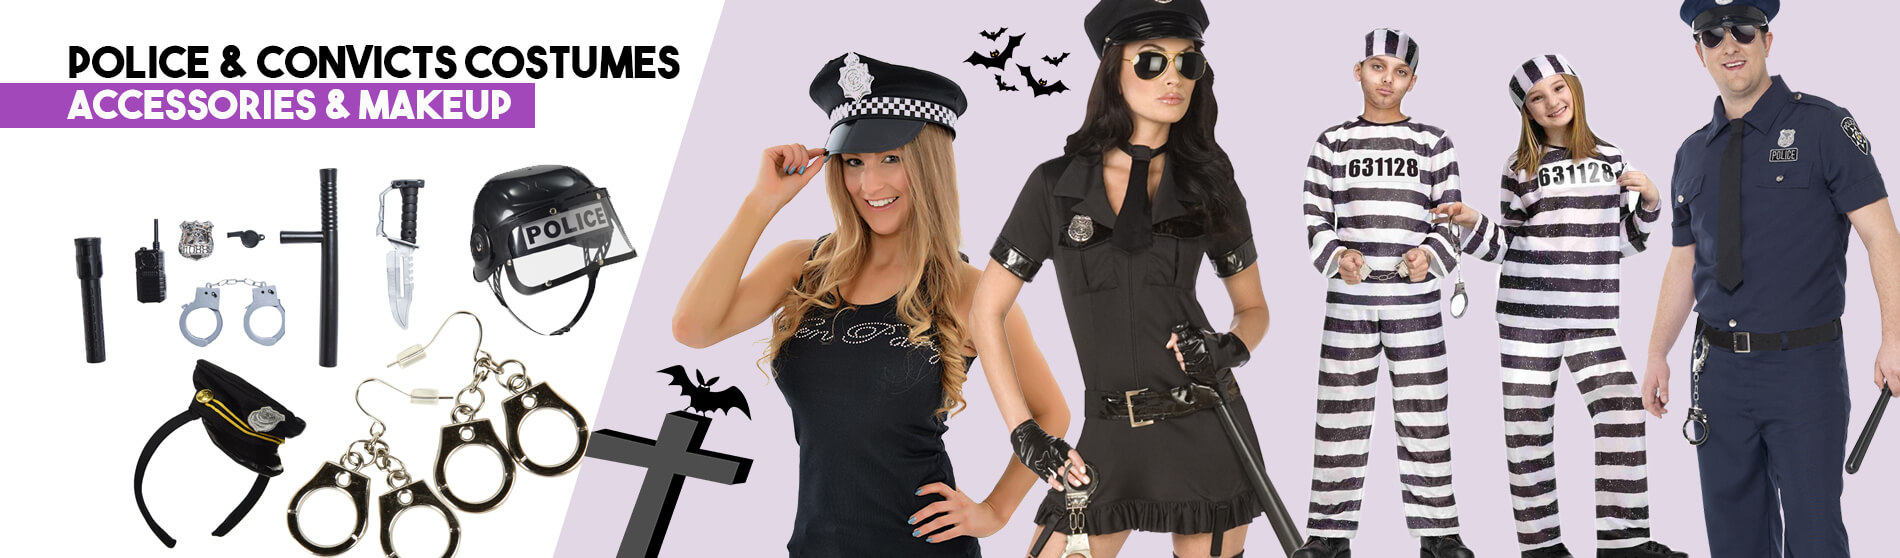 Glendale Halloween : Police-Convicts-Costume-Accessories